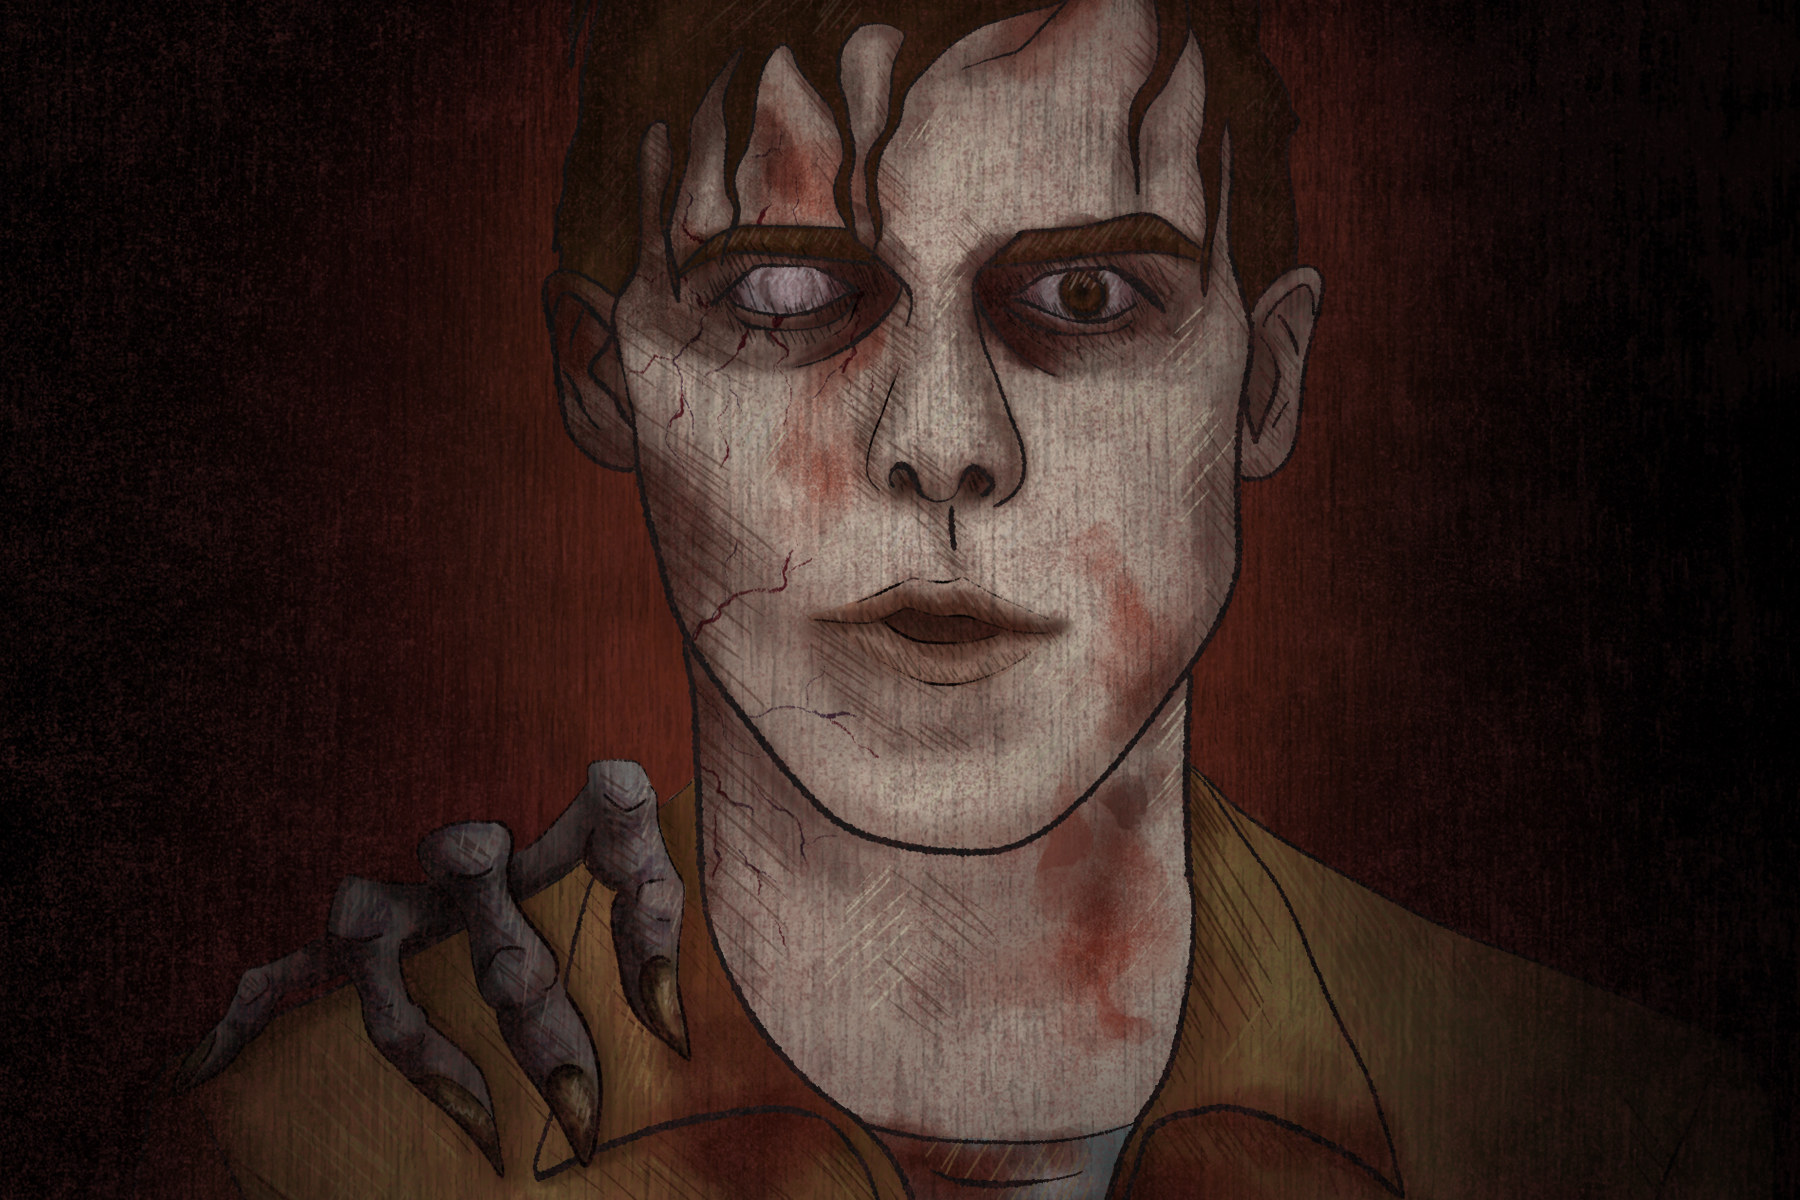 An illustration based on the film The Conjuring: The Devil Made Me Do It featuring the bloody antagonist with a clawed hand gripping his shoulder. (Illustration by Alicia Paauwe, Oakland University)